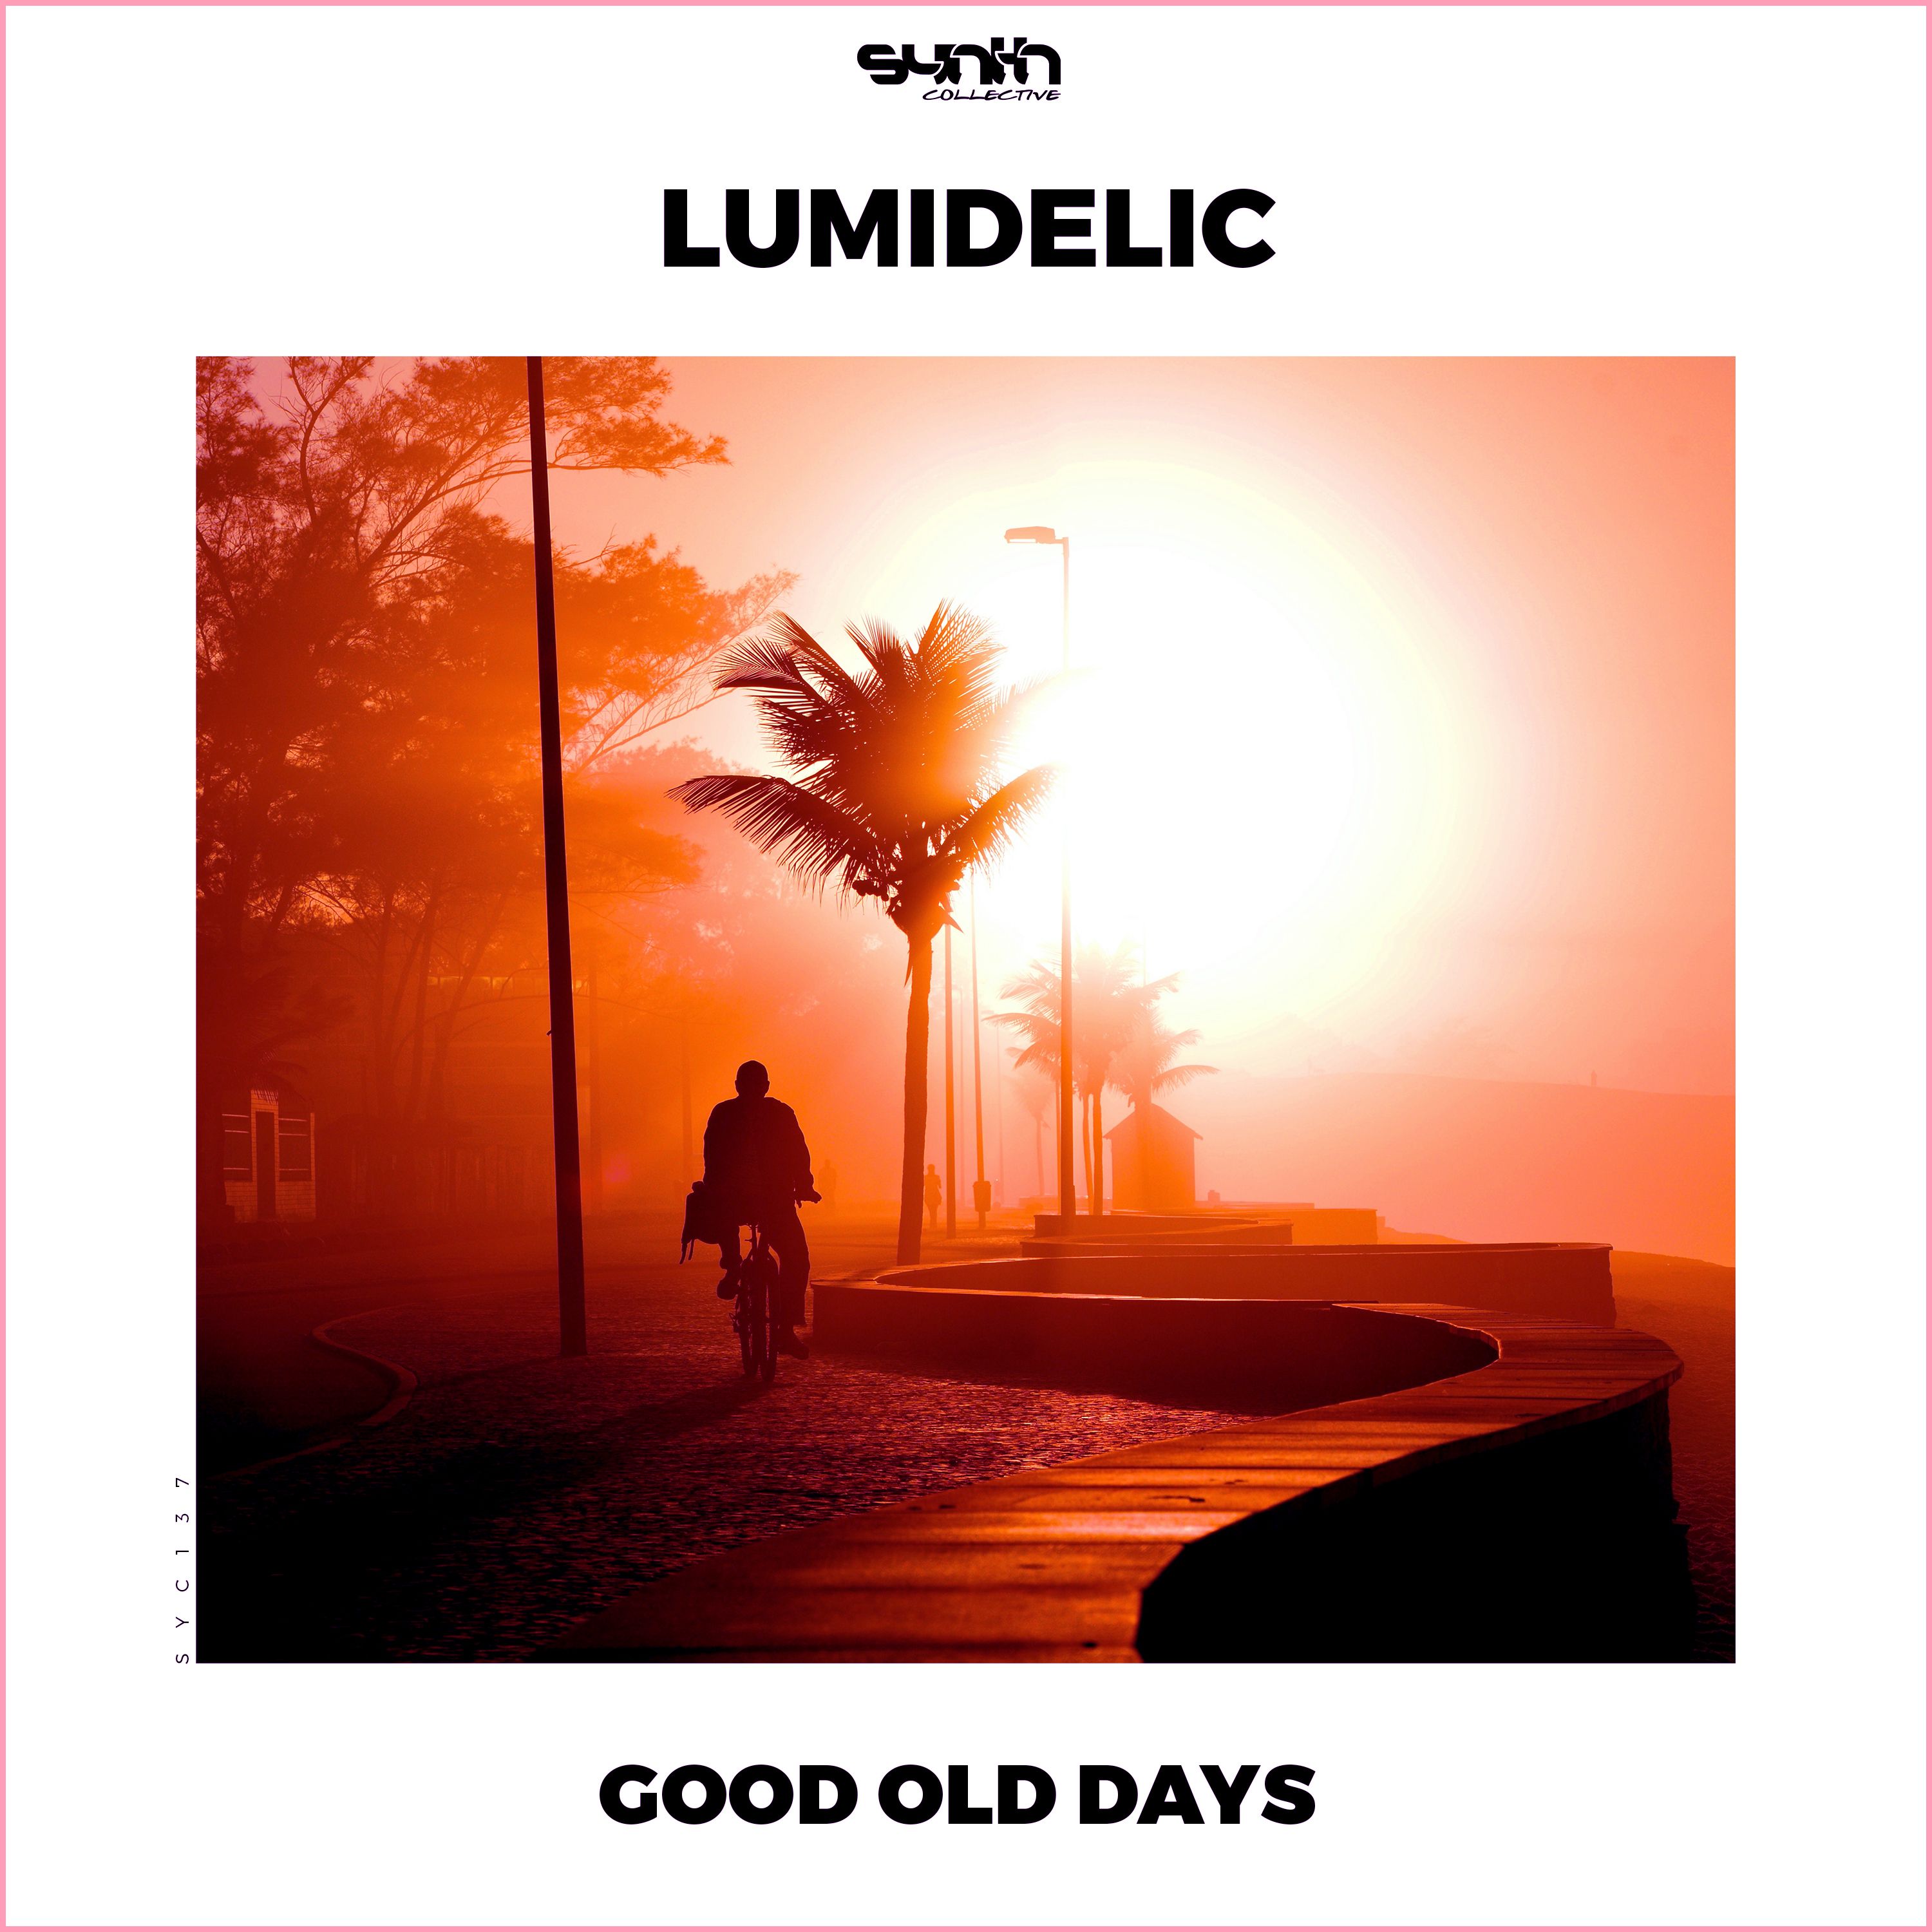 Ladda ner Lumidelic - Good Old Days [Synth Collective]